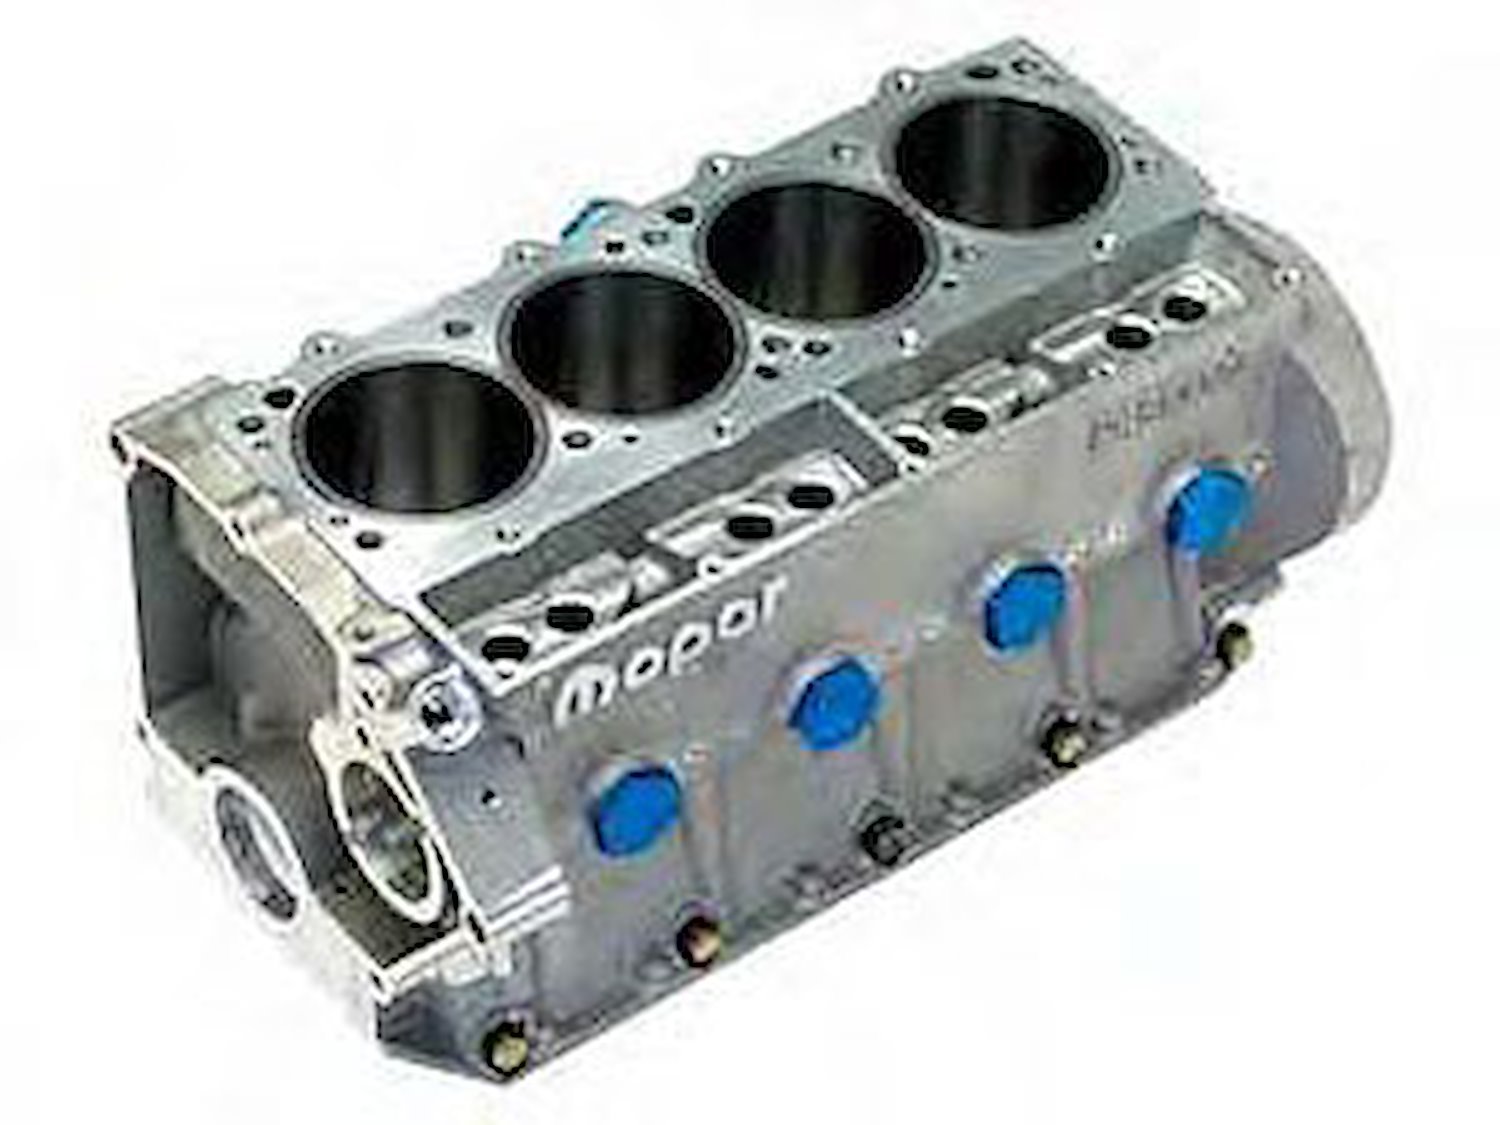 A4 Aluminum Engine Block Fits W8, W9 or W9RP Cylinder Head